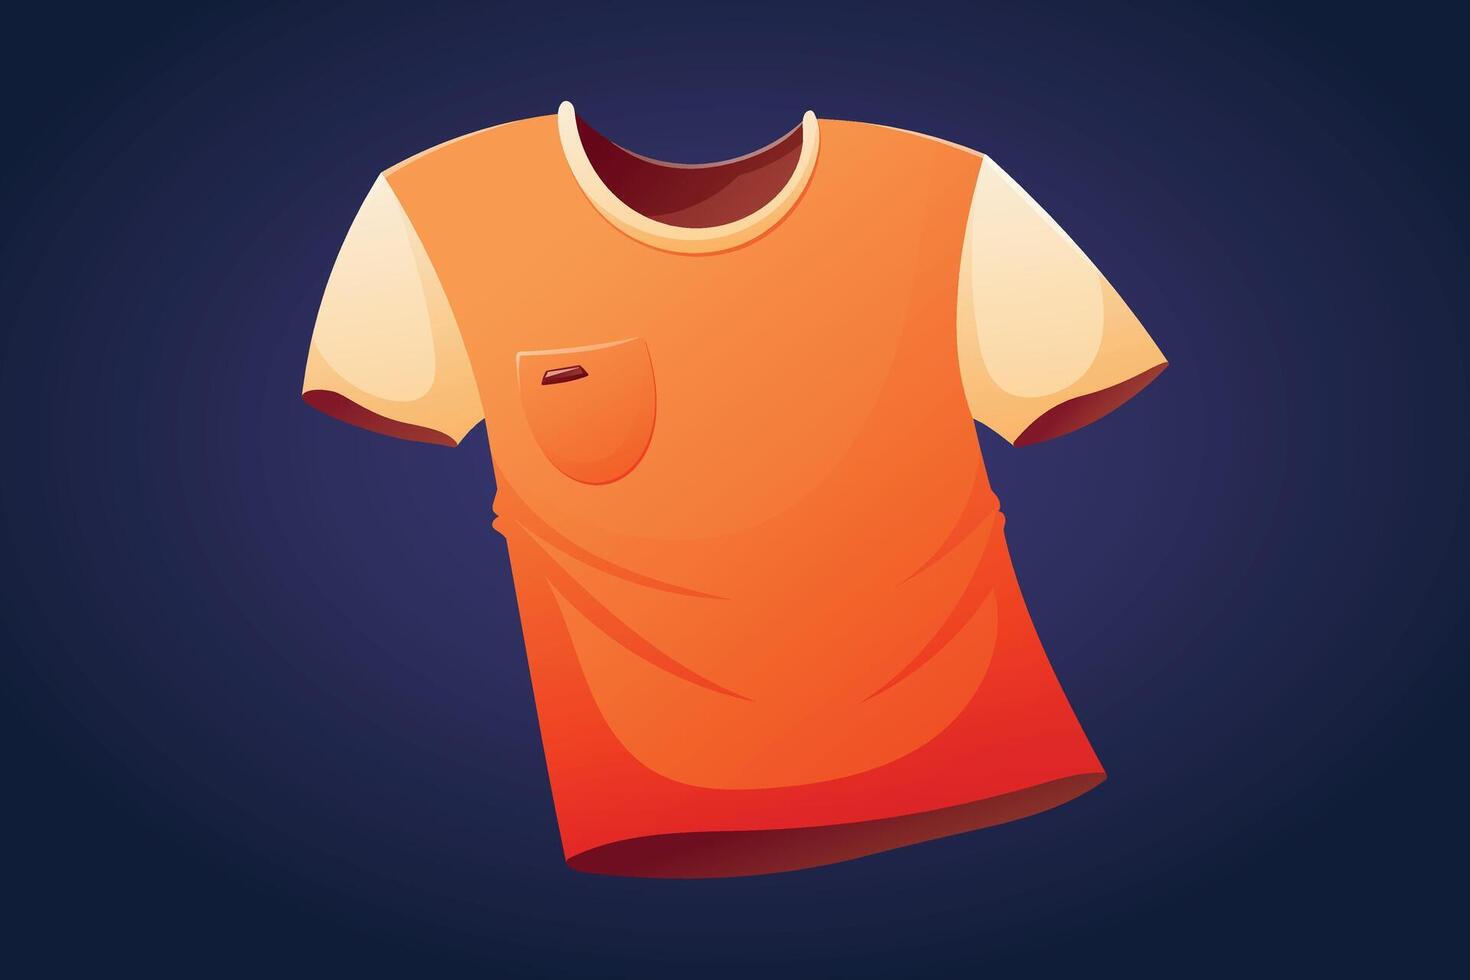 Casual orange men's, children's or women's T-shirt with pocket. isolated cartoon illustration of a clothing item. vector